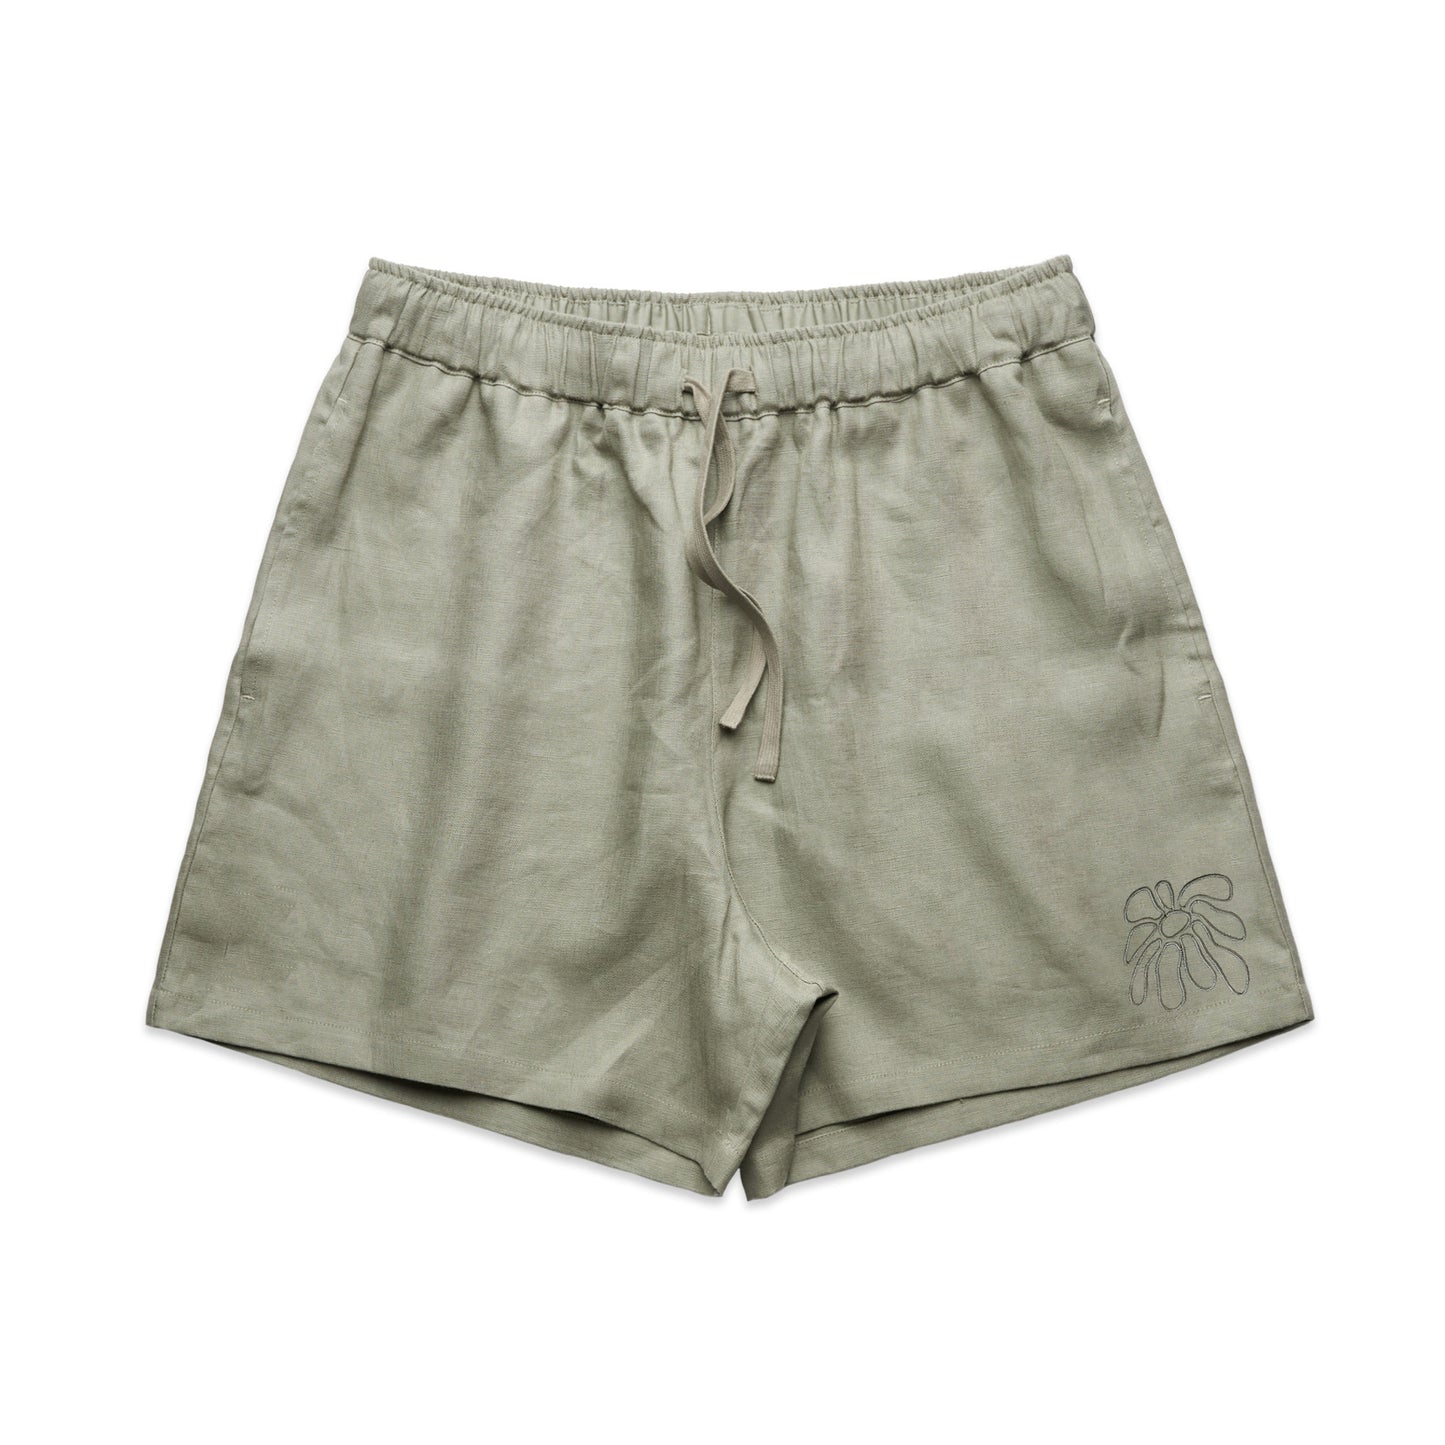 FLWRS Embroidered Linen Shorts - Sage